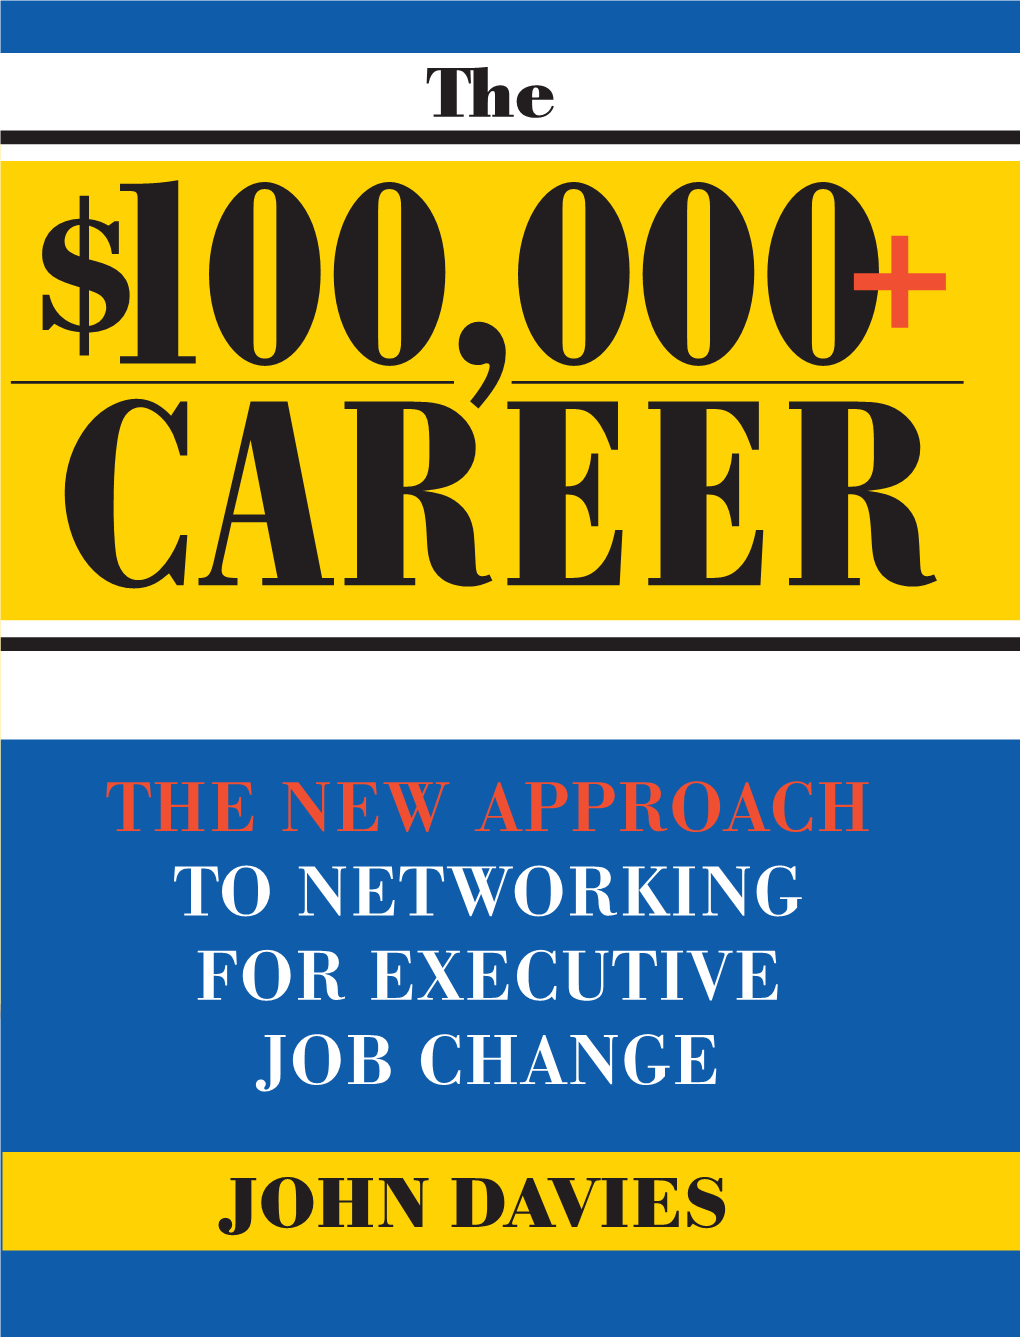 100000+ Career : the Power of Networking for Executive Job Change